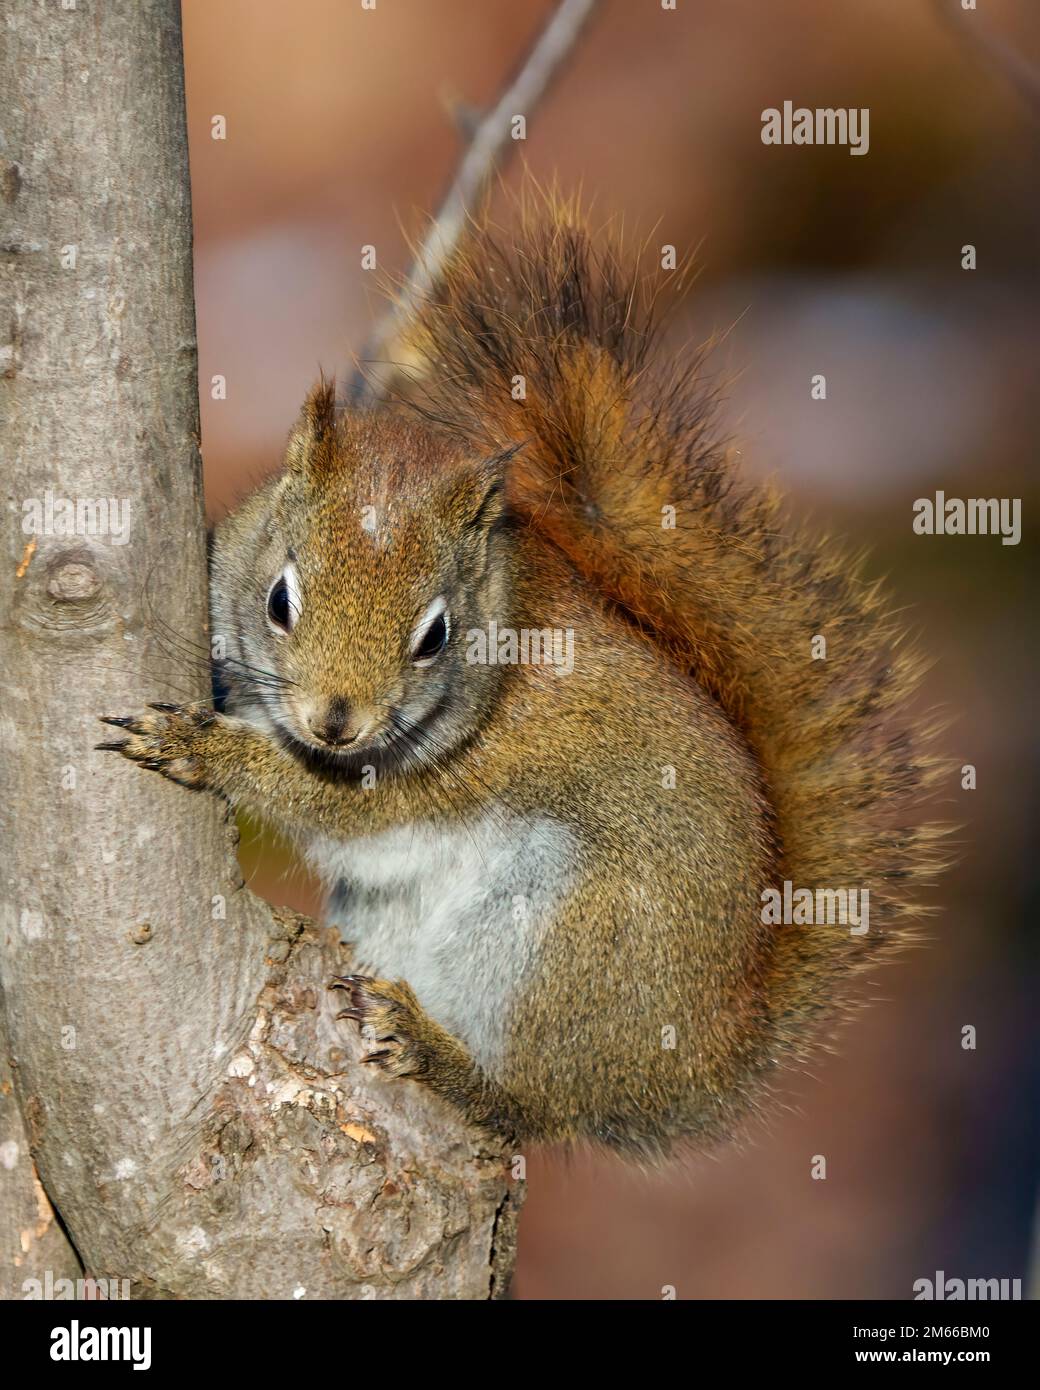 Squirrel close-up profile view in the forest standing on a branch tree with a blur background displaying its brown fur, paws, bushy tail, in its habit Stock Photo